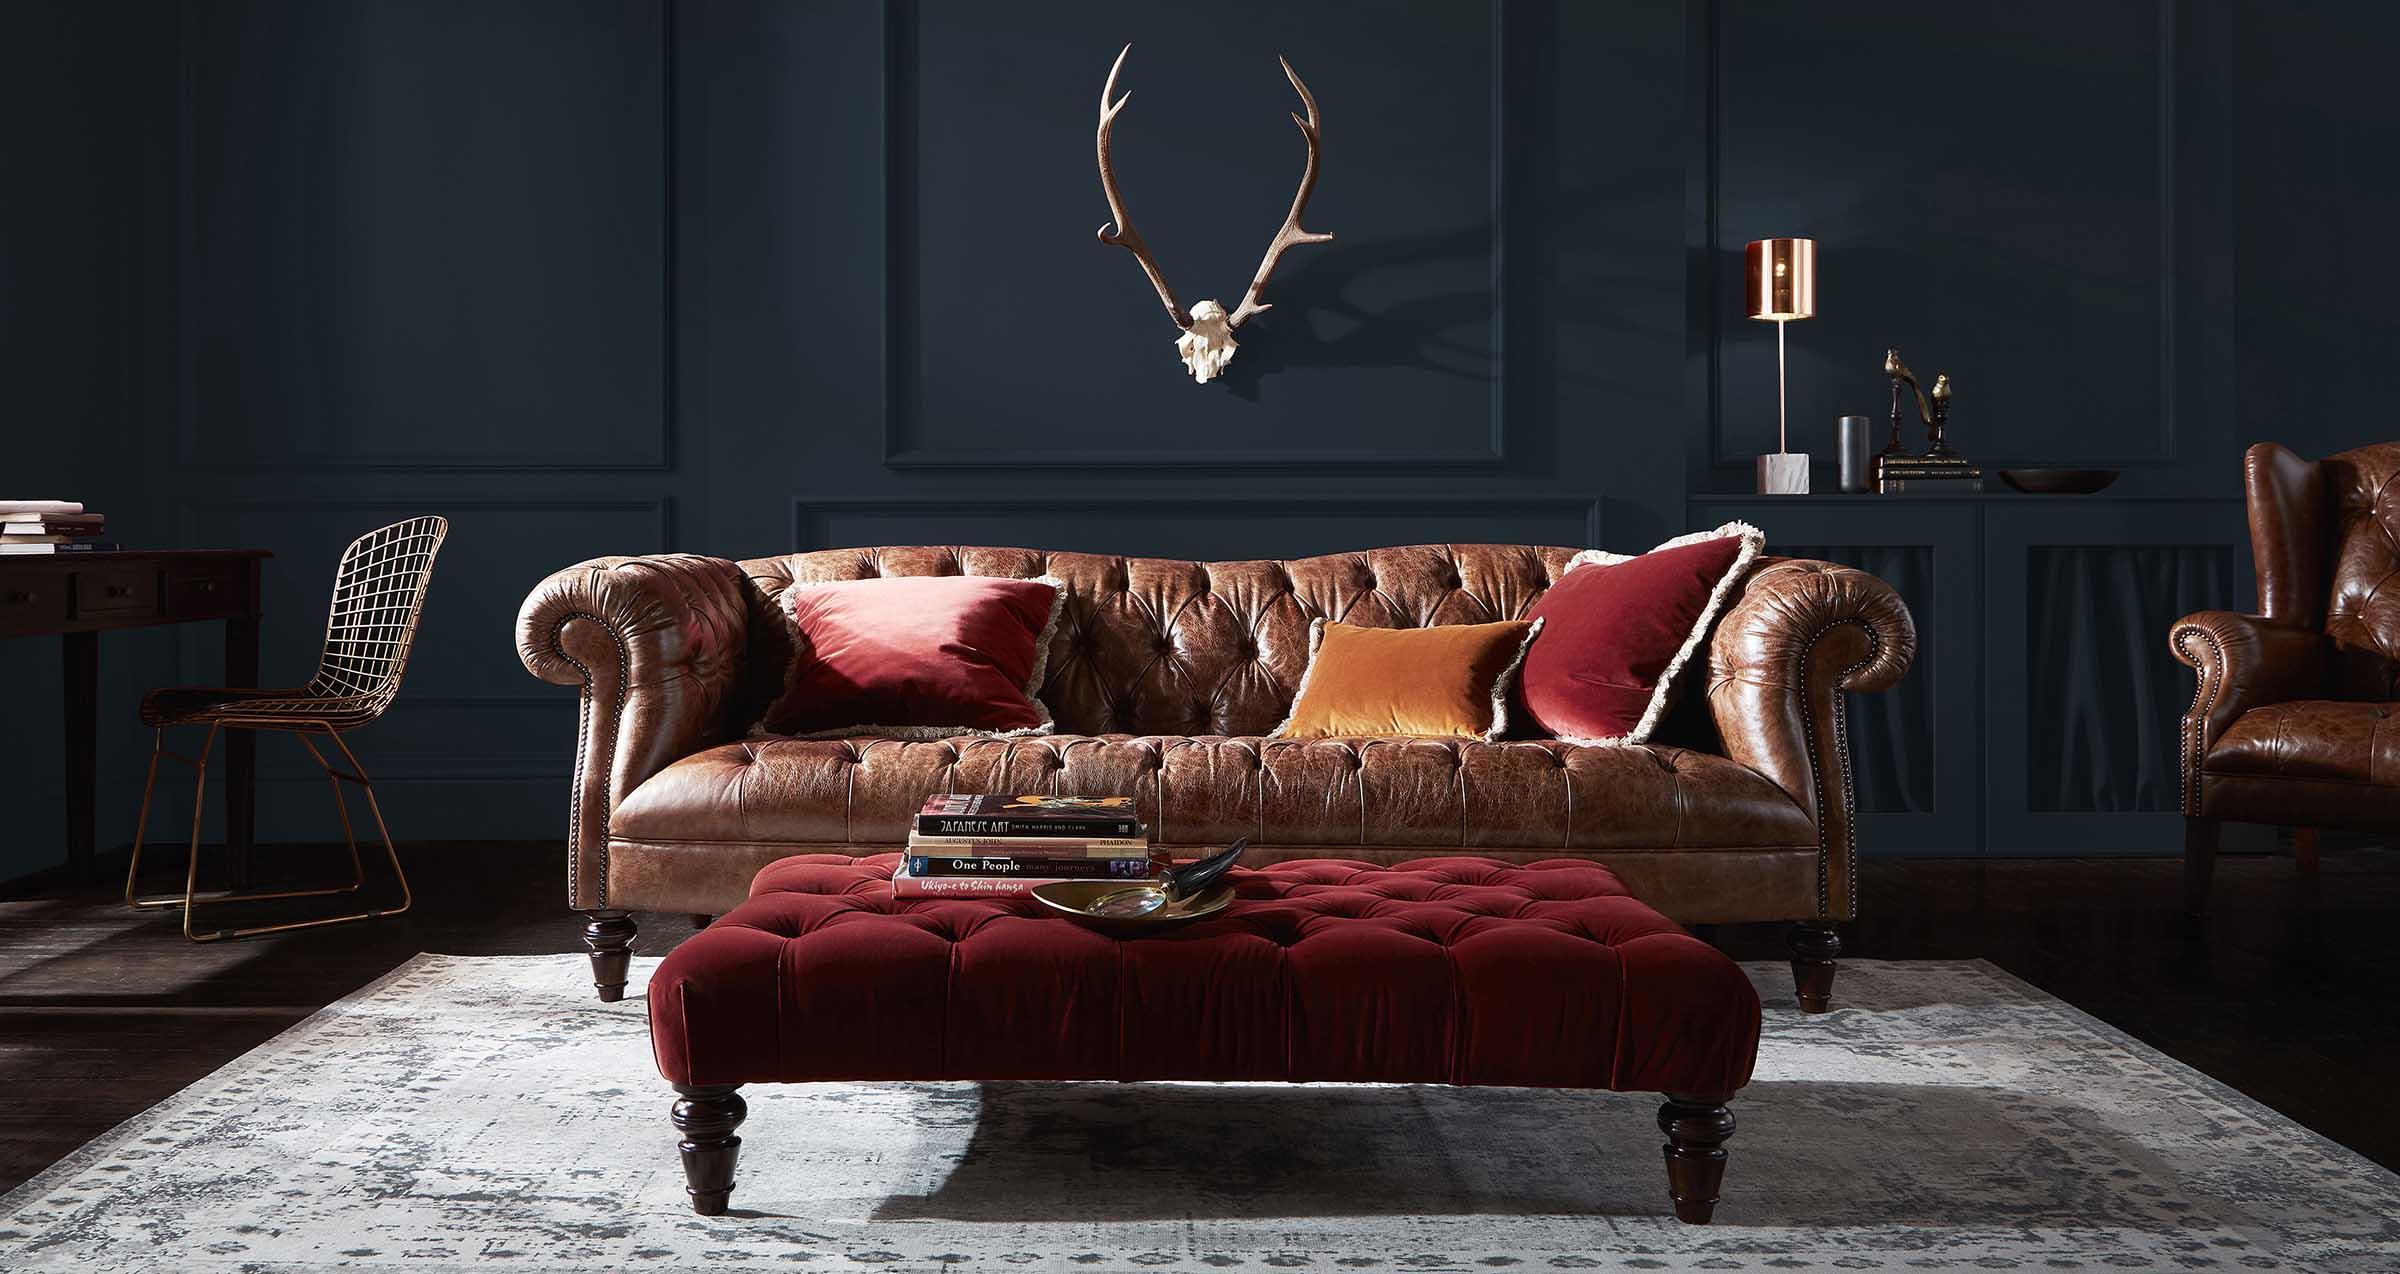 The history of the Chesterfield sofa